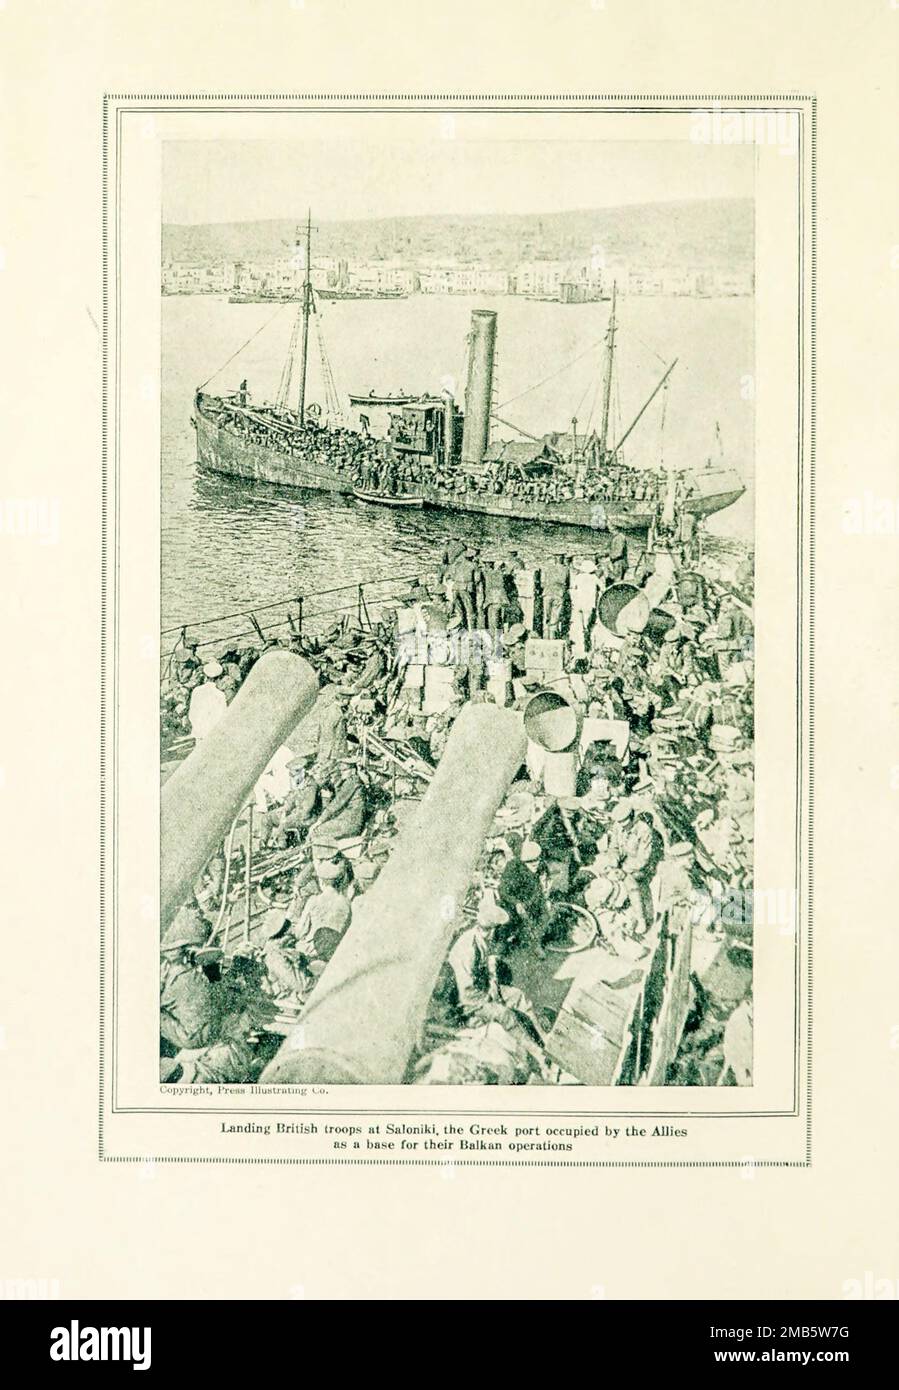 Landing British Troops at Saloniki, Greece from the book The story of the great war; the complete historical records of events to date DIPLOMATIC AND STATE PAPERS by Reynolds, Francis Joseph, 1867-1937; Churchill, Allen Leon; Miller, Francis Trevelyan, 1877-1959; Wood, Leonard, 1860-1927; Knight, Austin Melvin, 1854-1927; Palmer, Frederick, 1873-1958; Simonds, Frank Herbert, 1878-; Ruhl, Arthur Brown, 1876-  Volume VIII Published 1920 Stock Photo